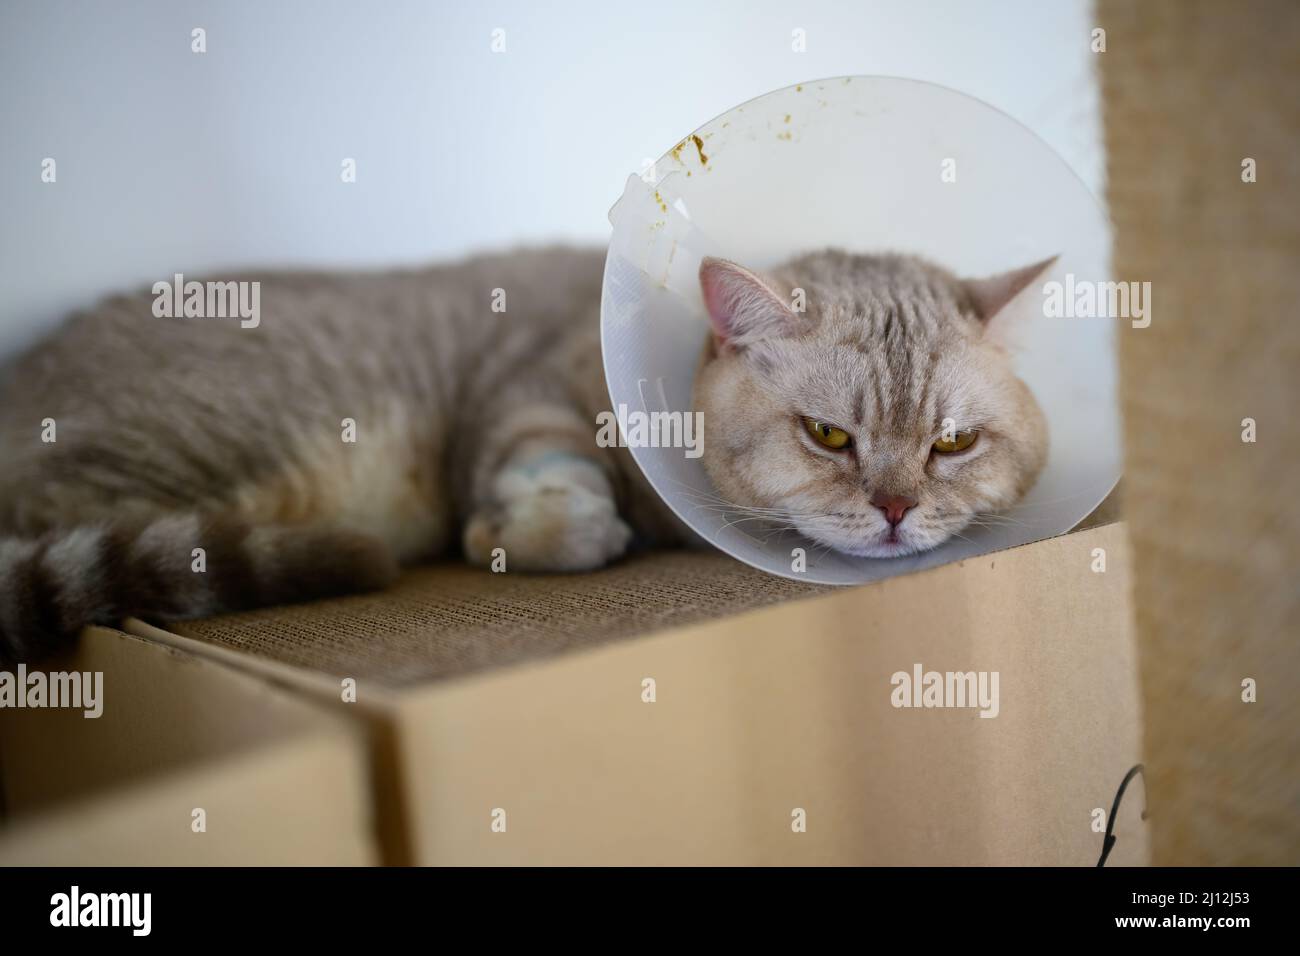 Young cat wears plastic collar to prevent licking, sleepy tabby It's sleeping on a cardboard box, Poor Sick Cat is tired of wearing a collar on its ne Stock Photo